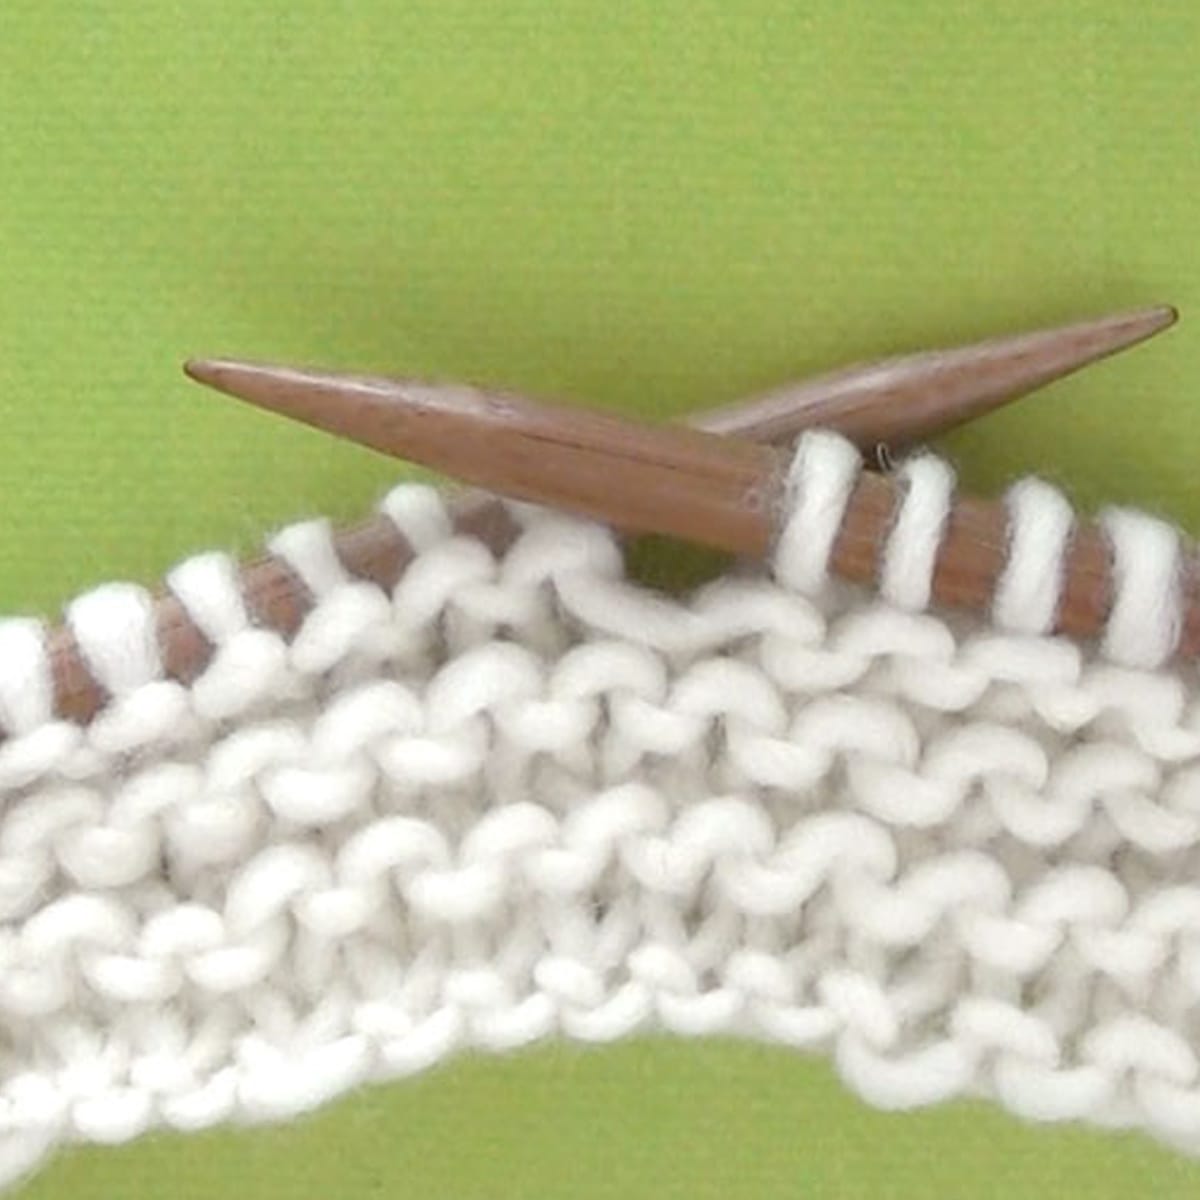 Garter Stitch Knitted Pattern cast on knitting needles in white yarn atop a green background.